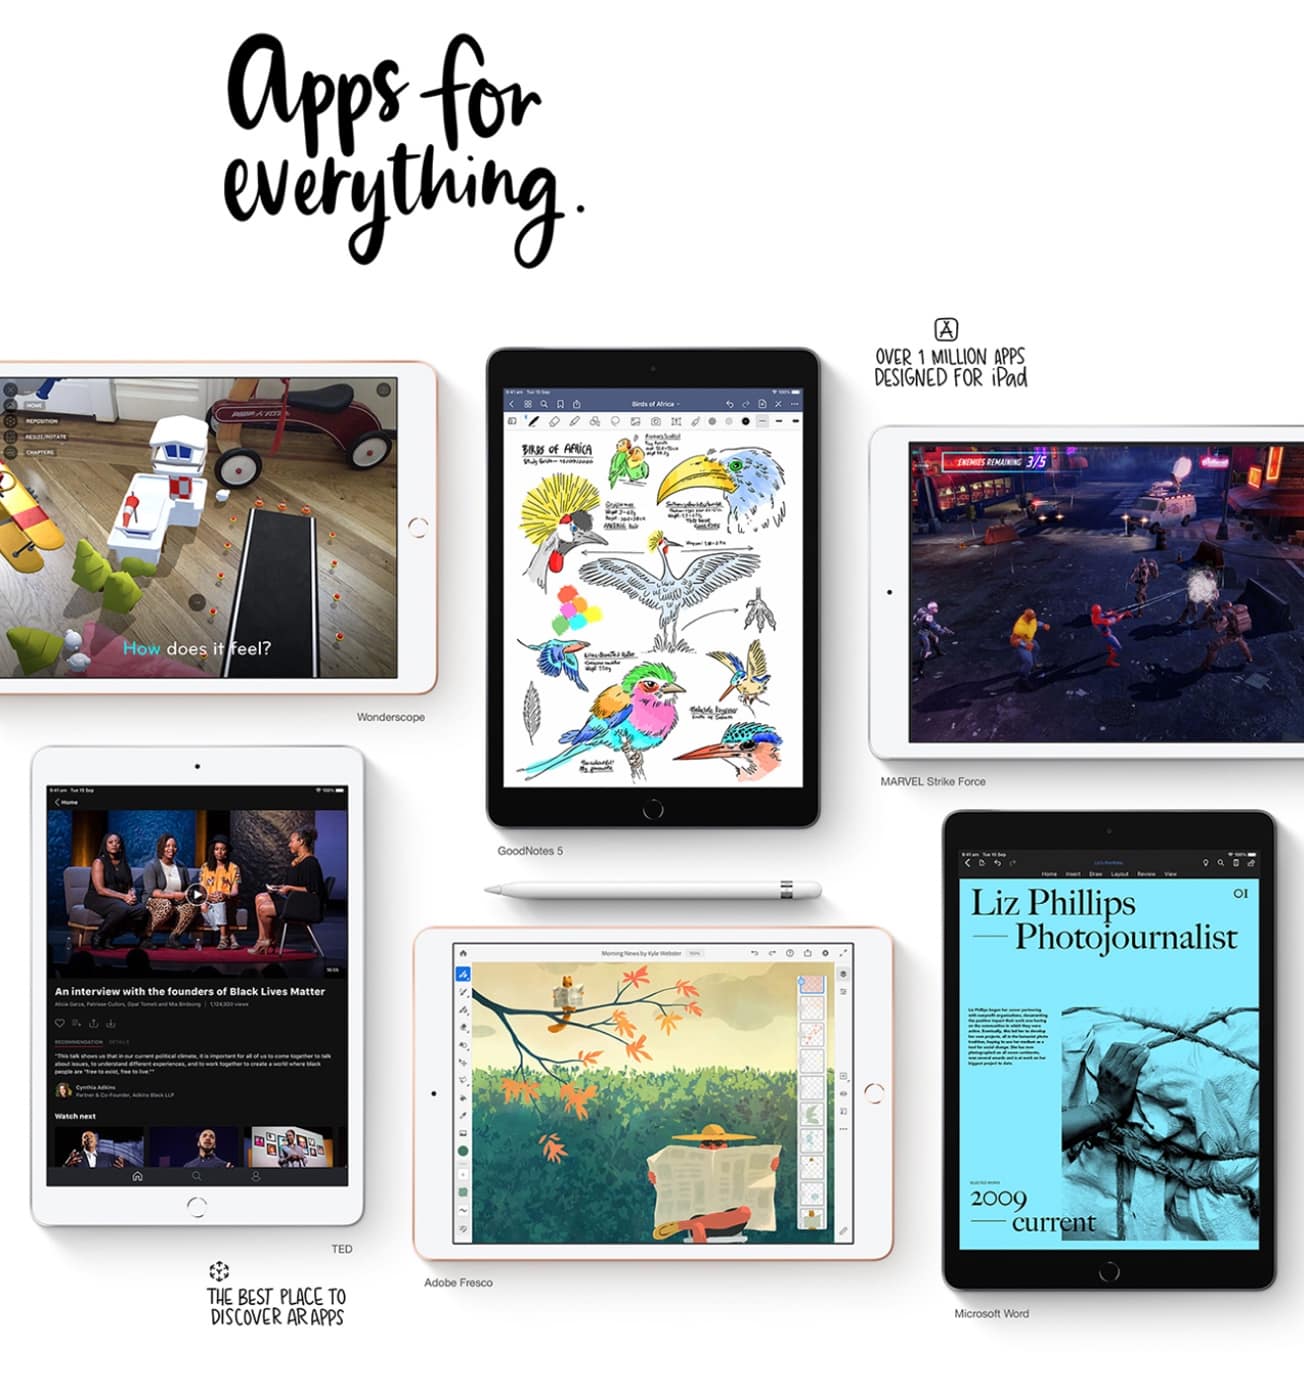 Over 1 million apps designed for iPad